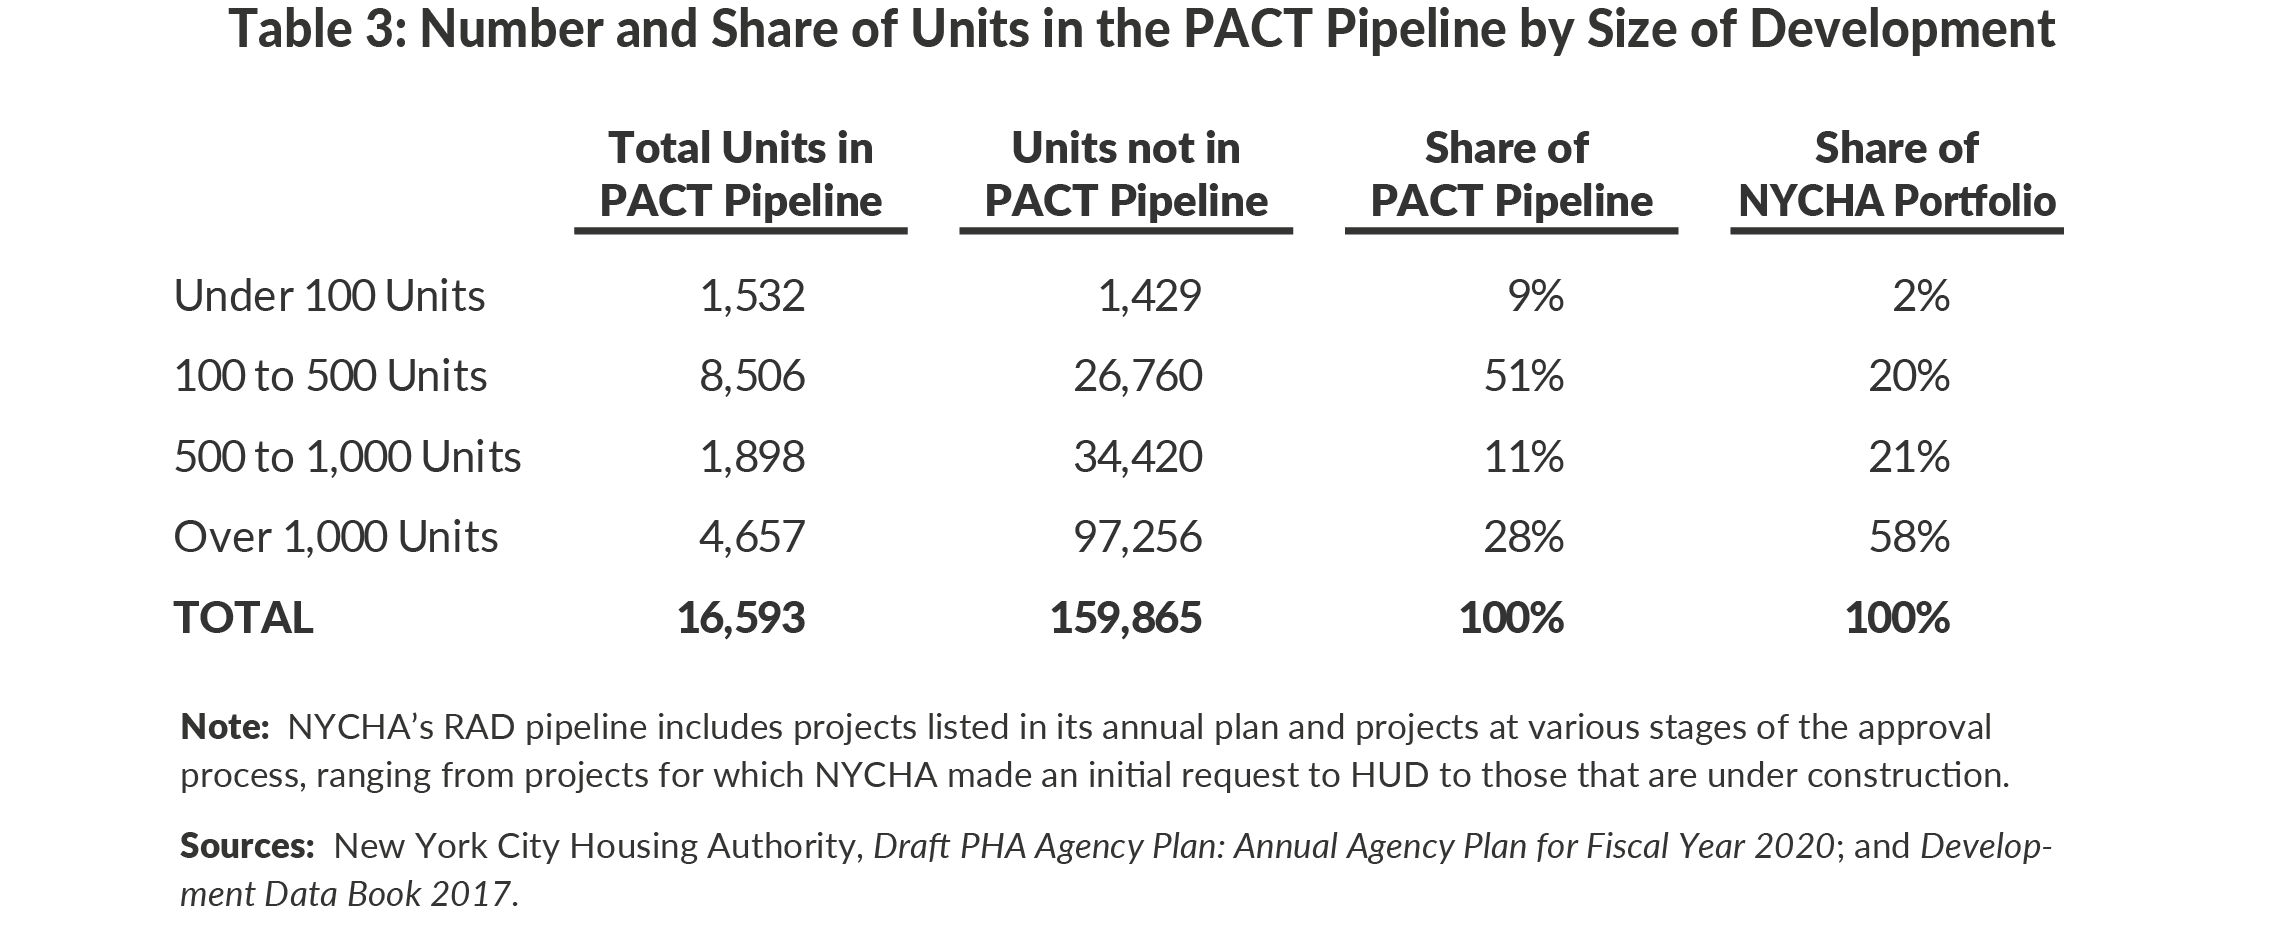 Table 3. Number and Share of Units in the PACT Pipeline by Size of Development